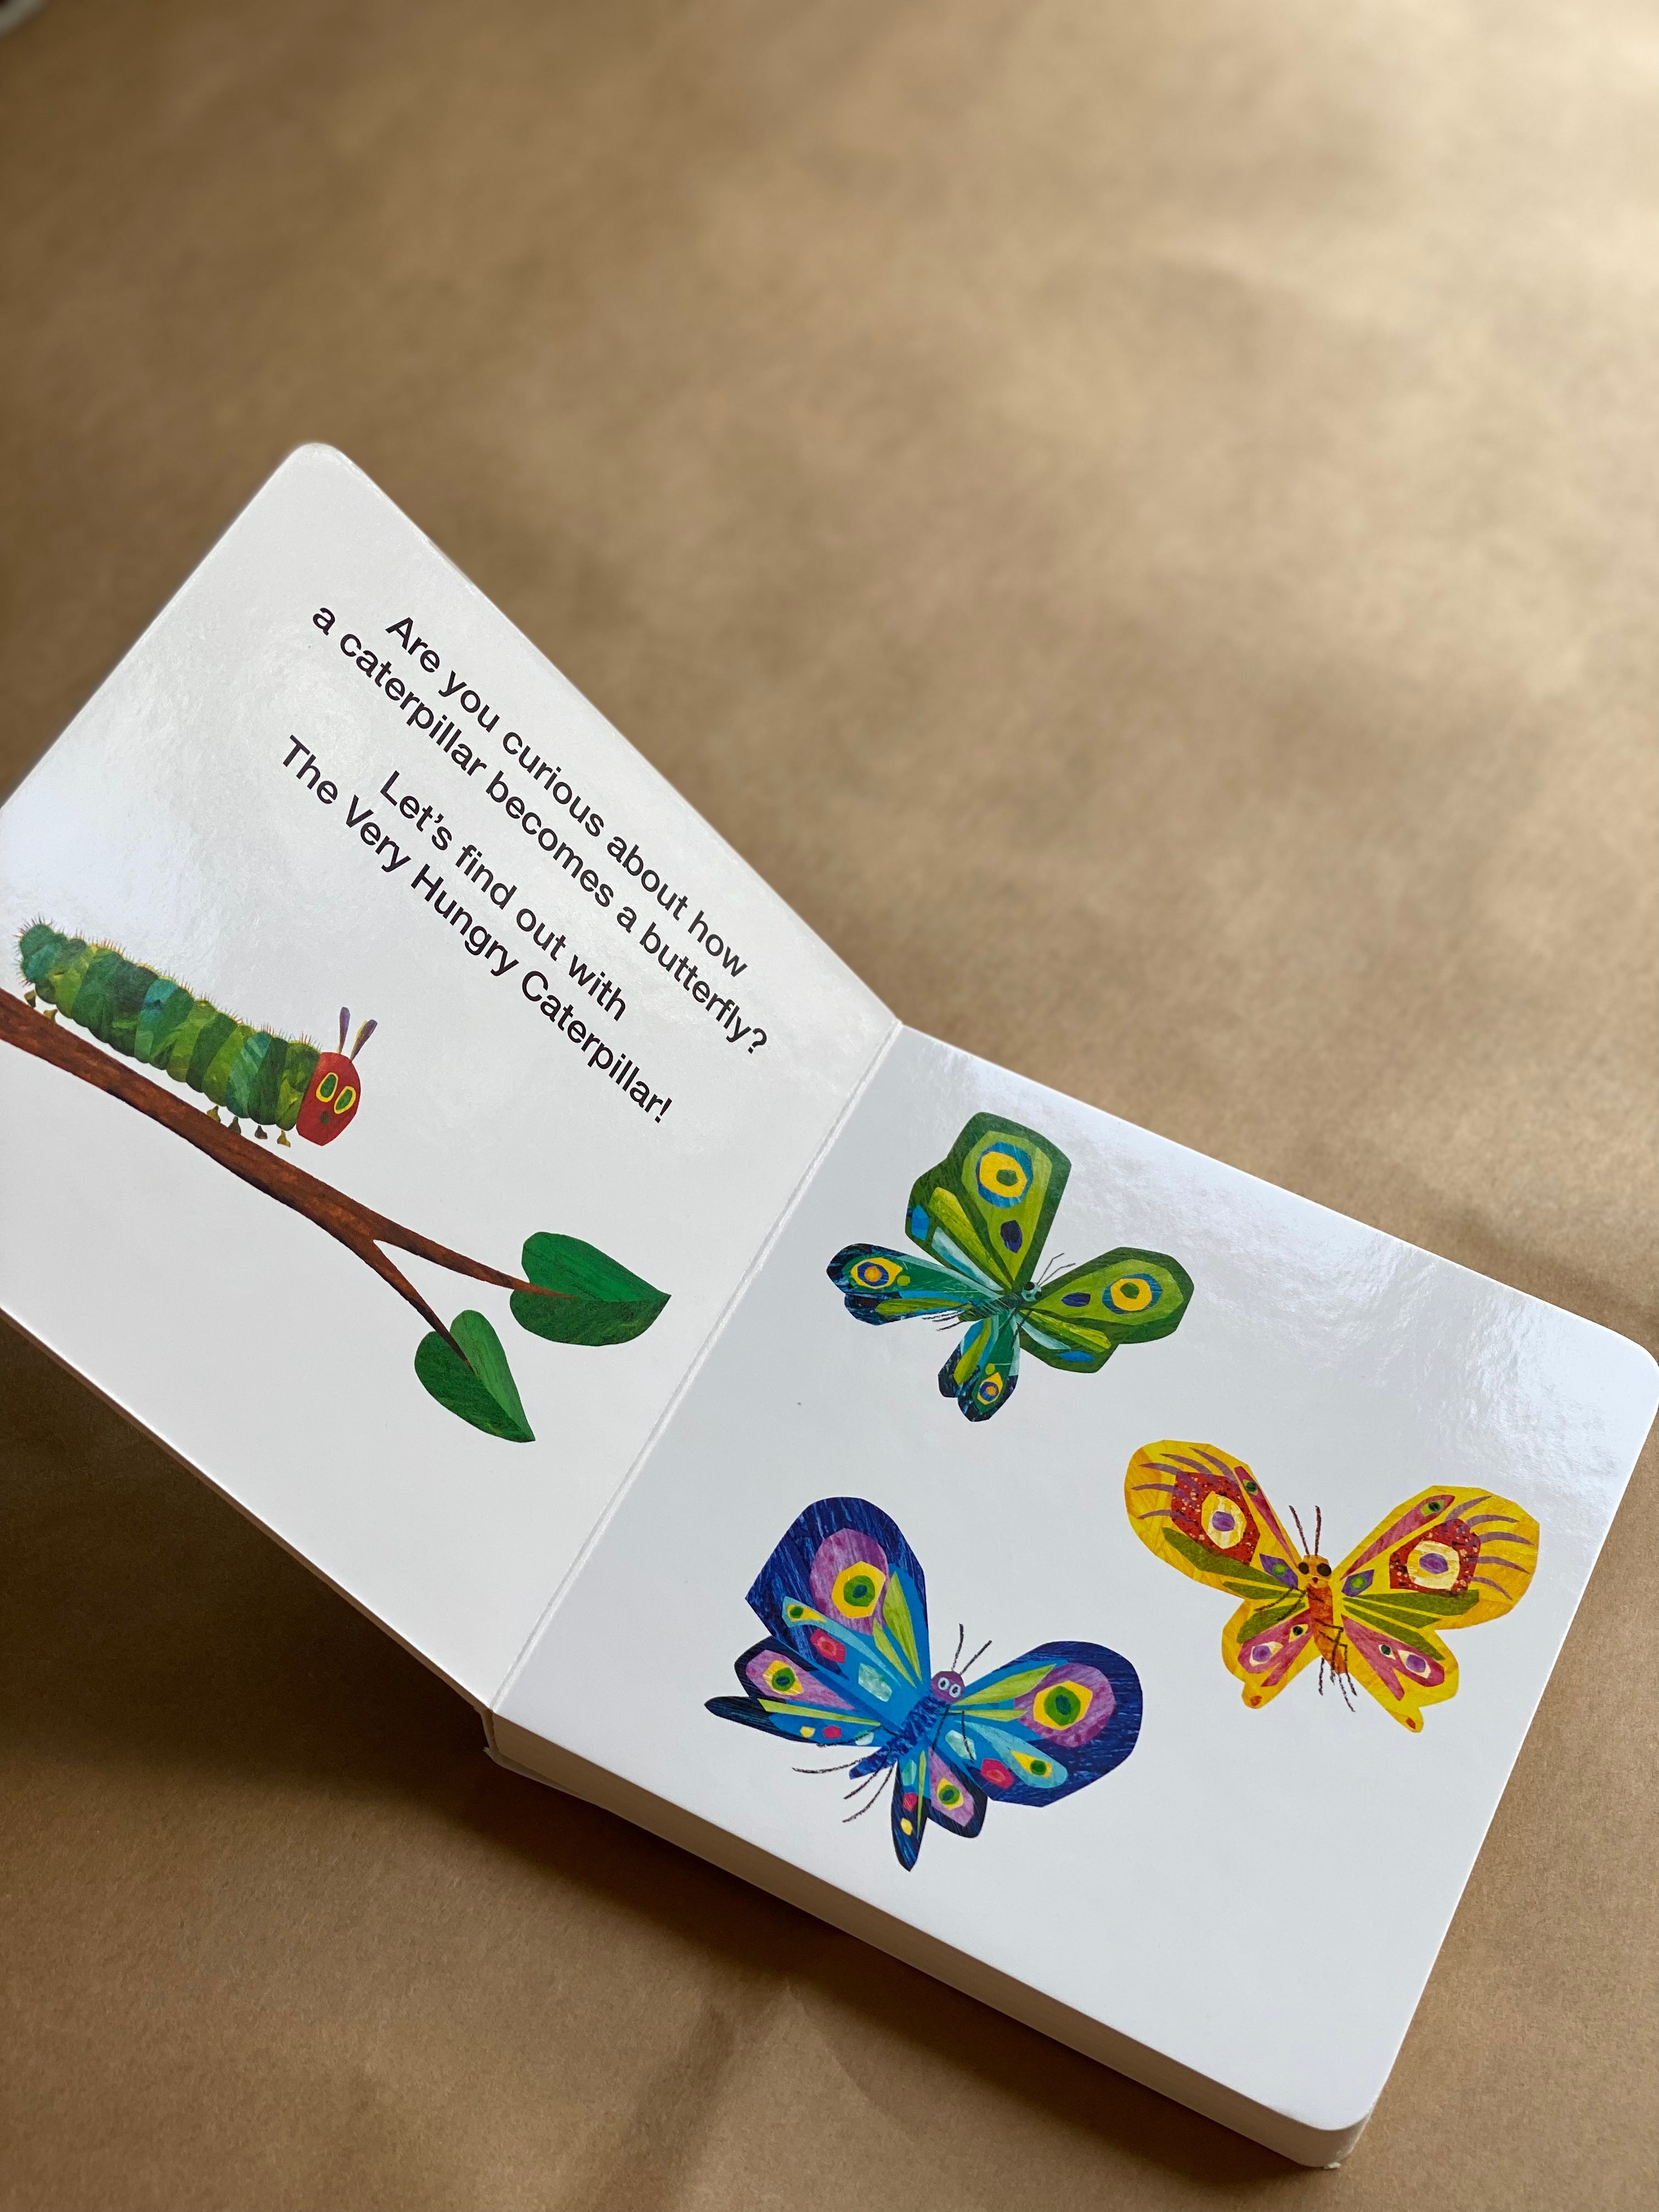 How Does A Caterpillar Change? Life Cycles with The Very Hungry Caterpillar